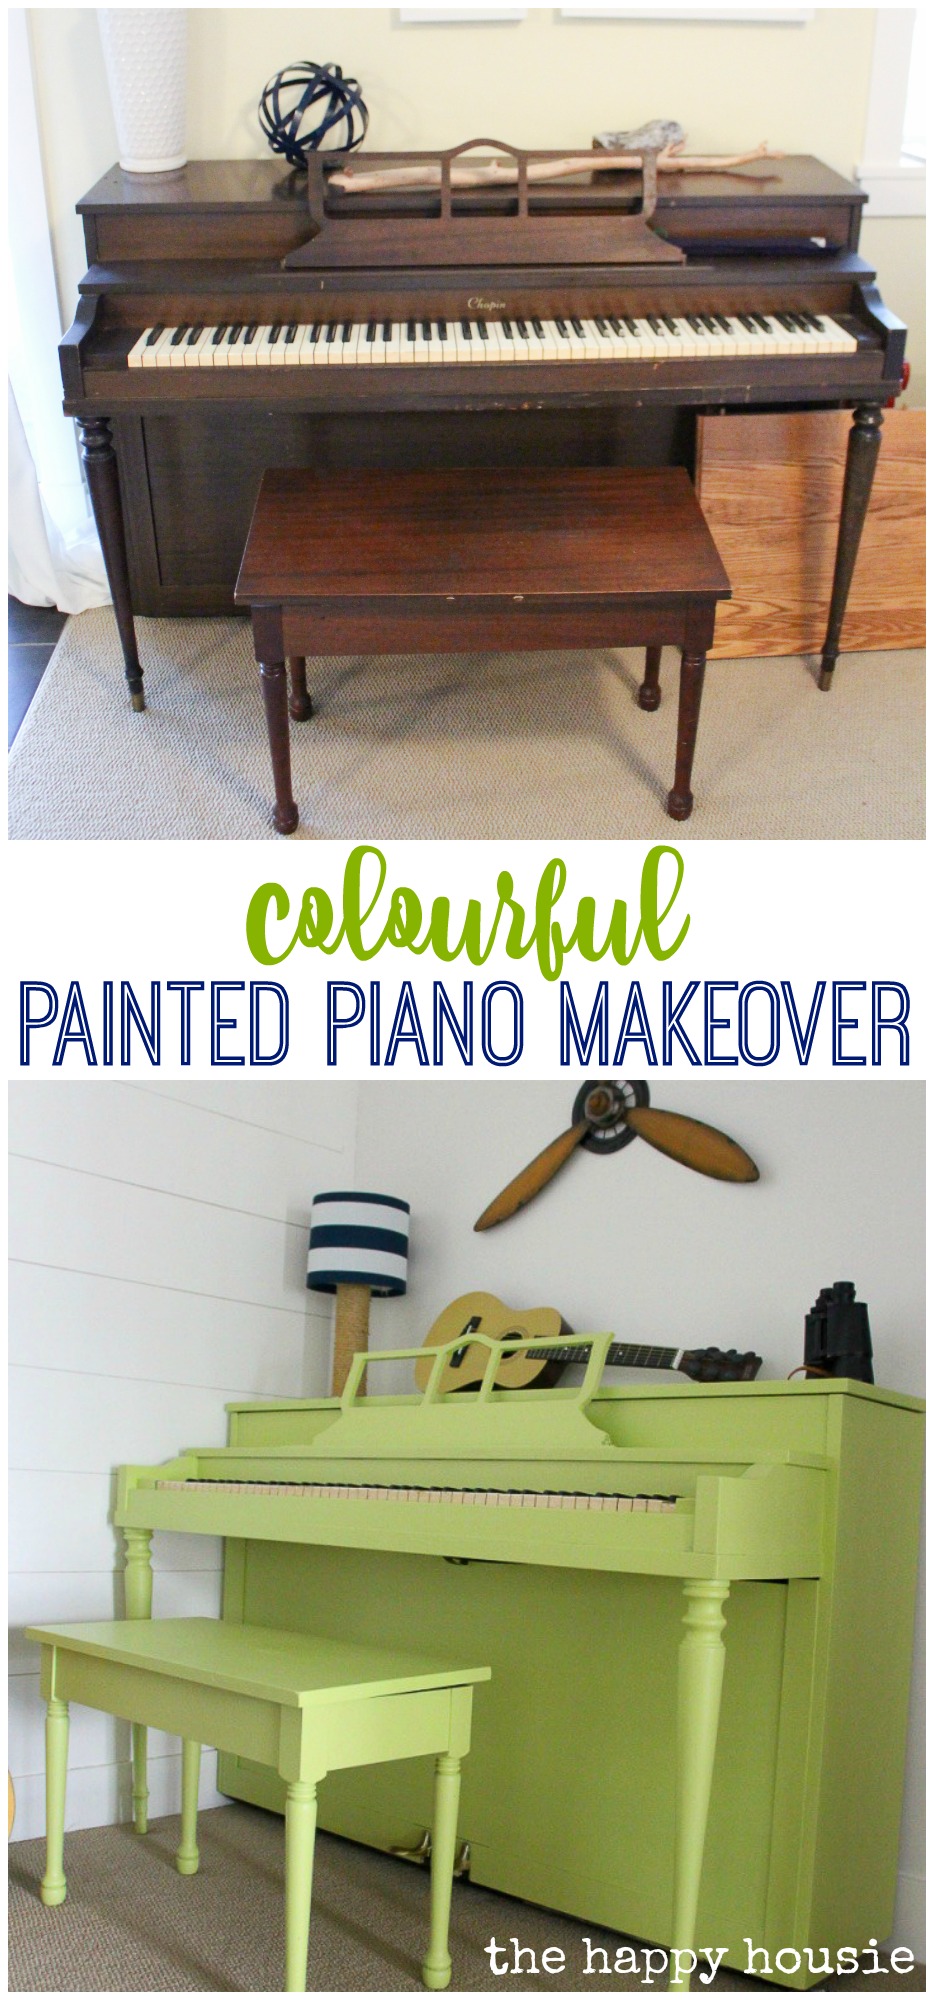 Colourful Painted Piano Makeover graphic.